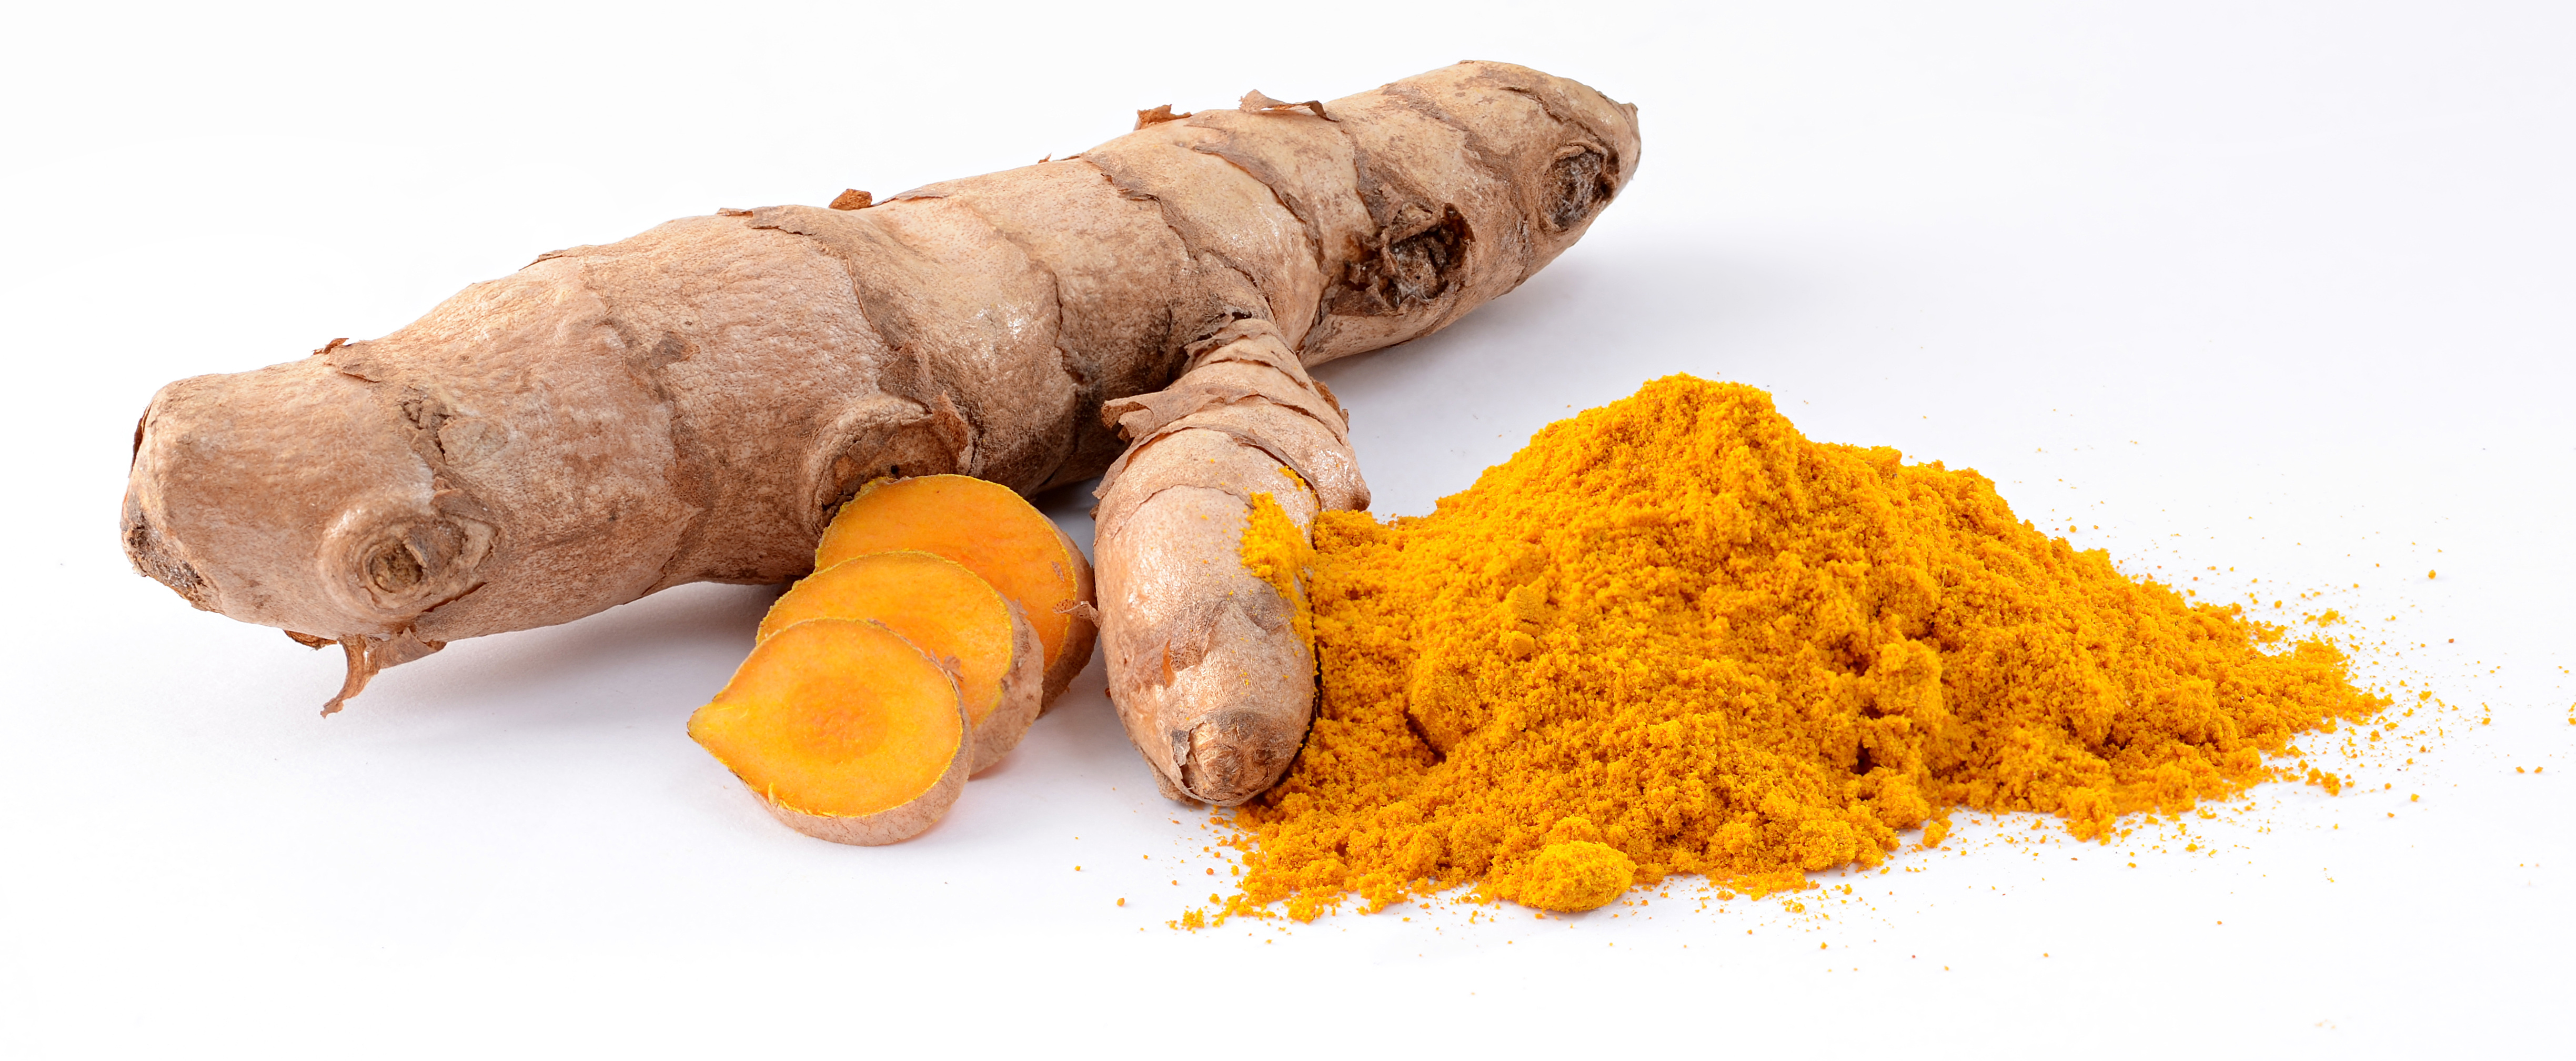 - Integrating Curcumin into Your Daily Routine for Overall Wellness